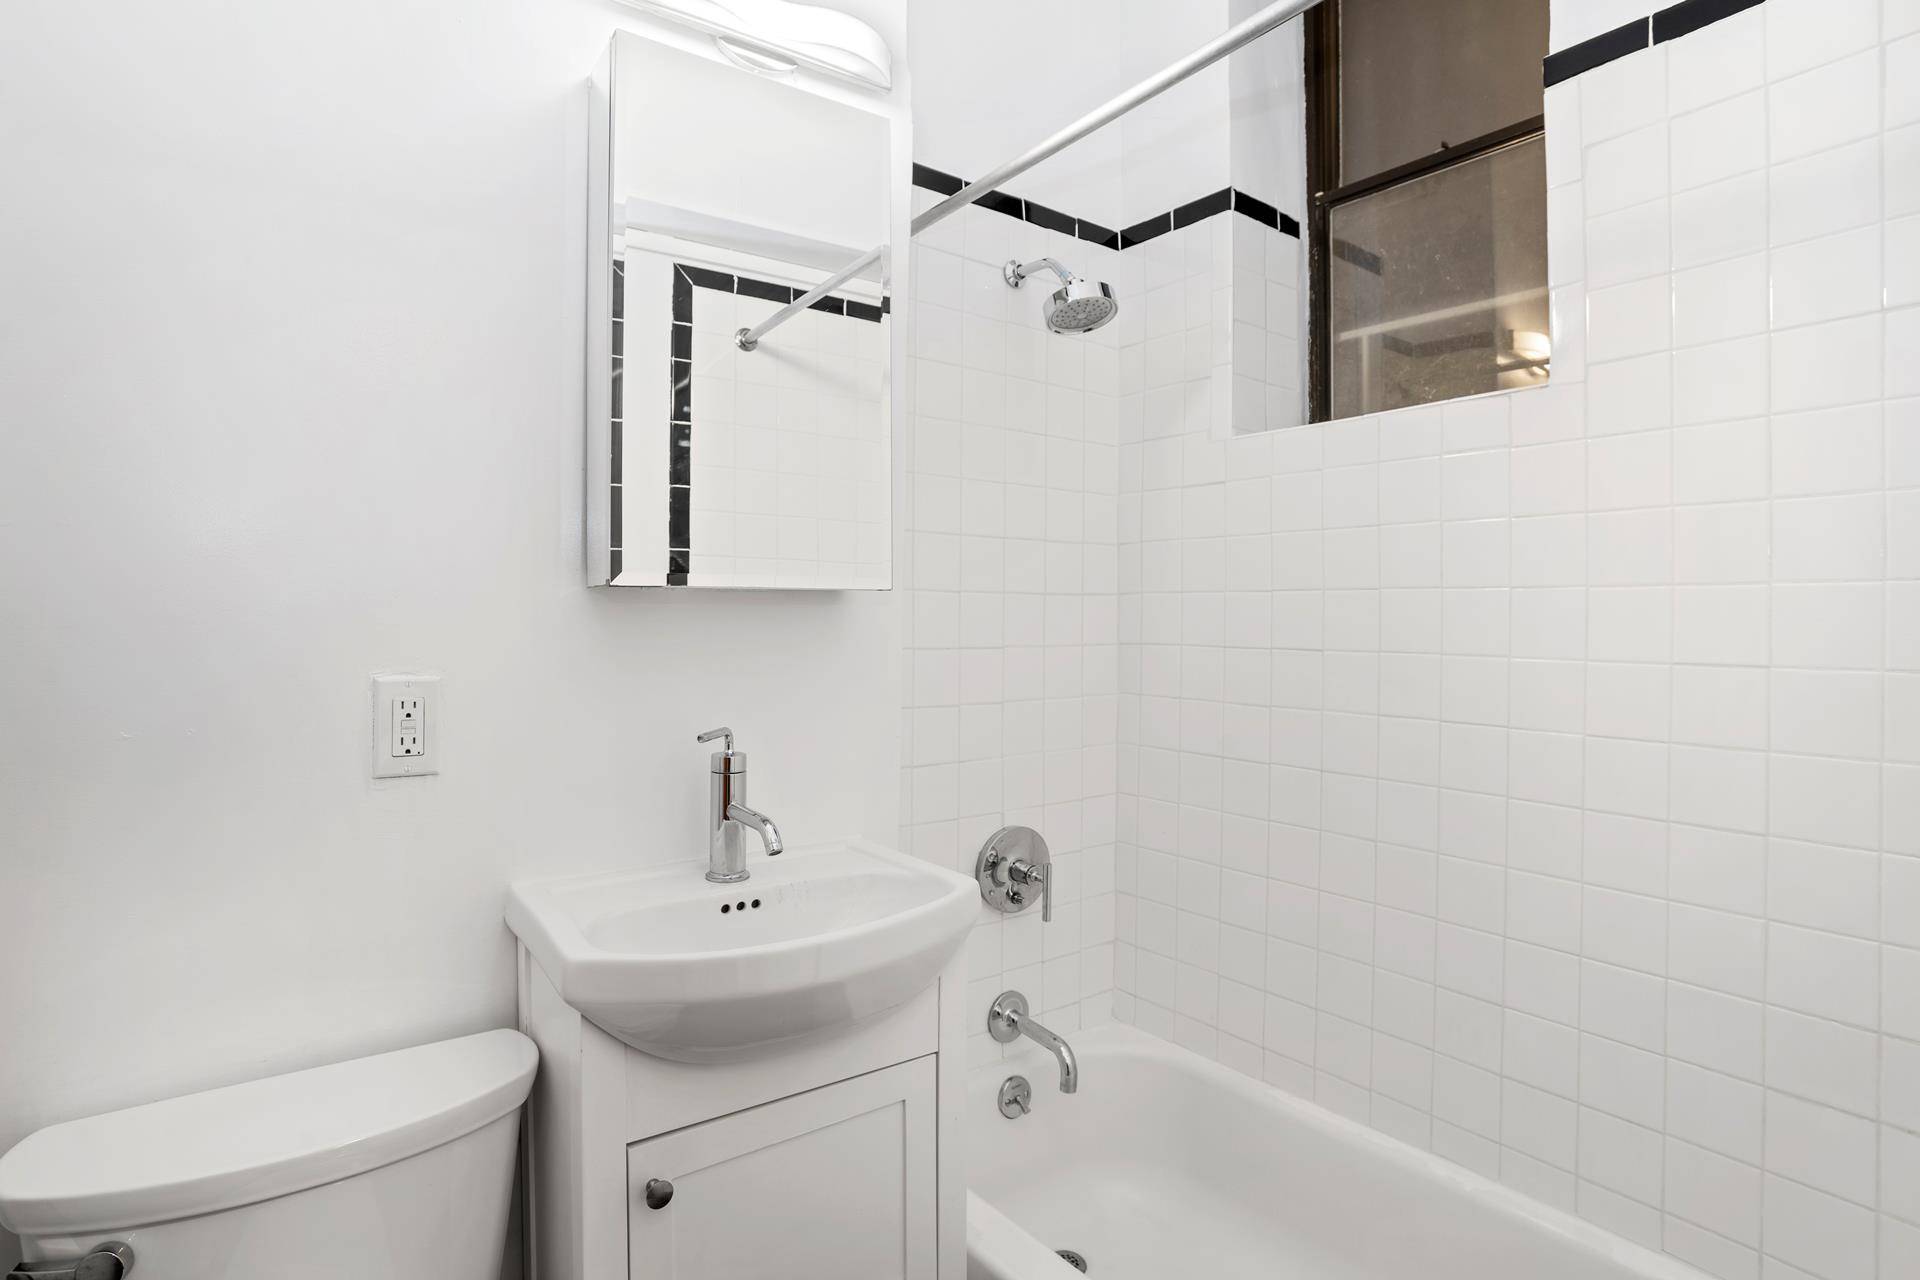 This is a fully renovated, oversized one bedroom one bath home in the heart of Chelsea.